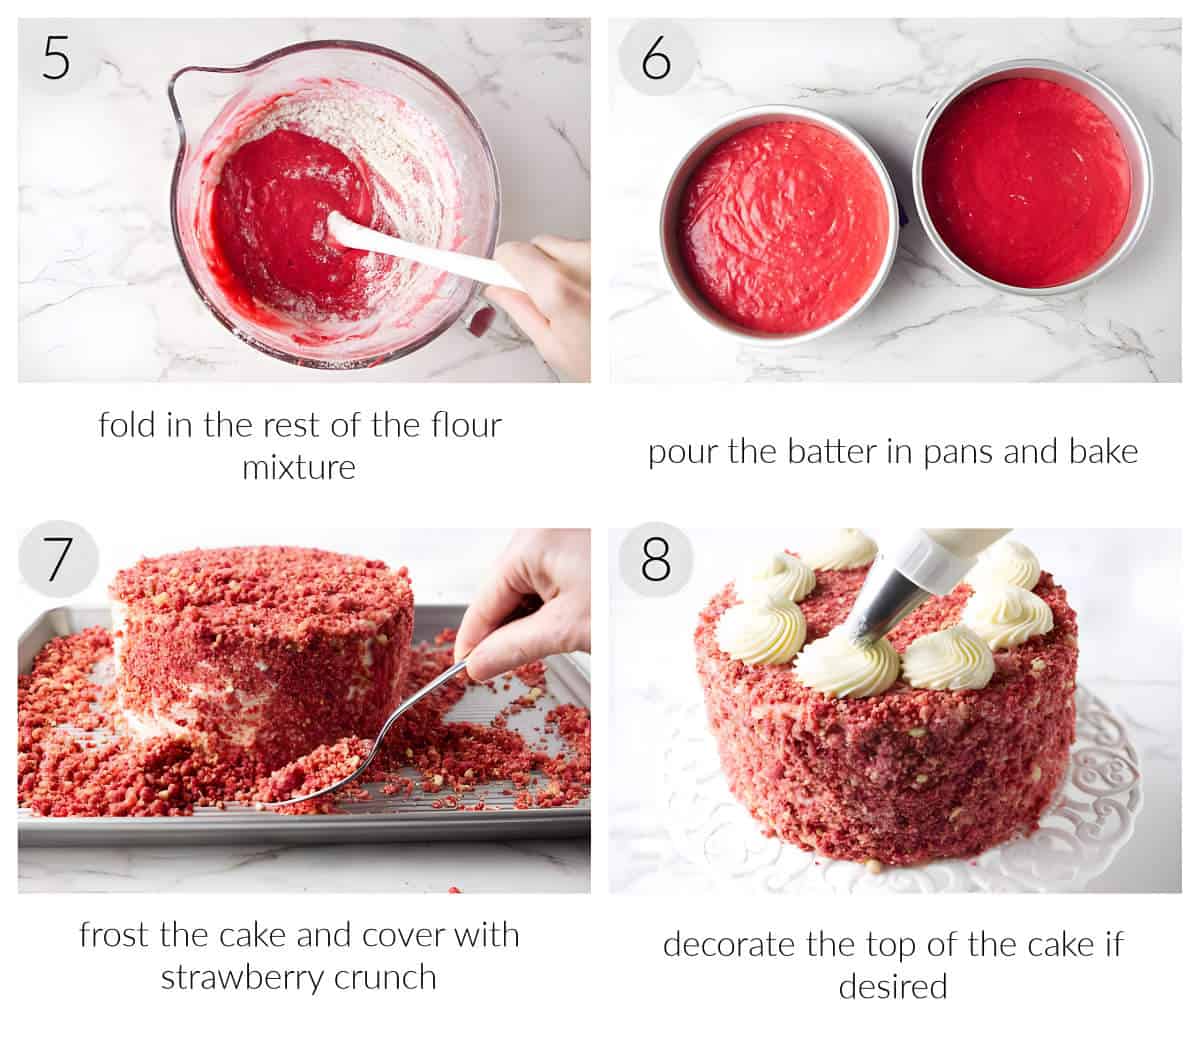 steps 5 through 8 on making and decorating a pink cake.